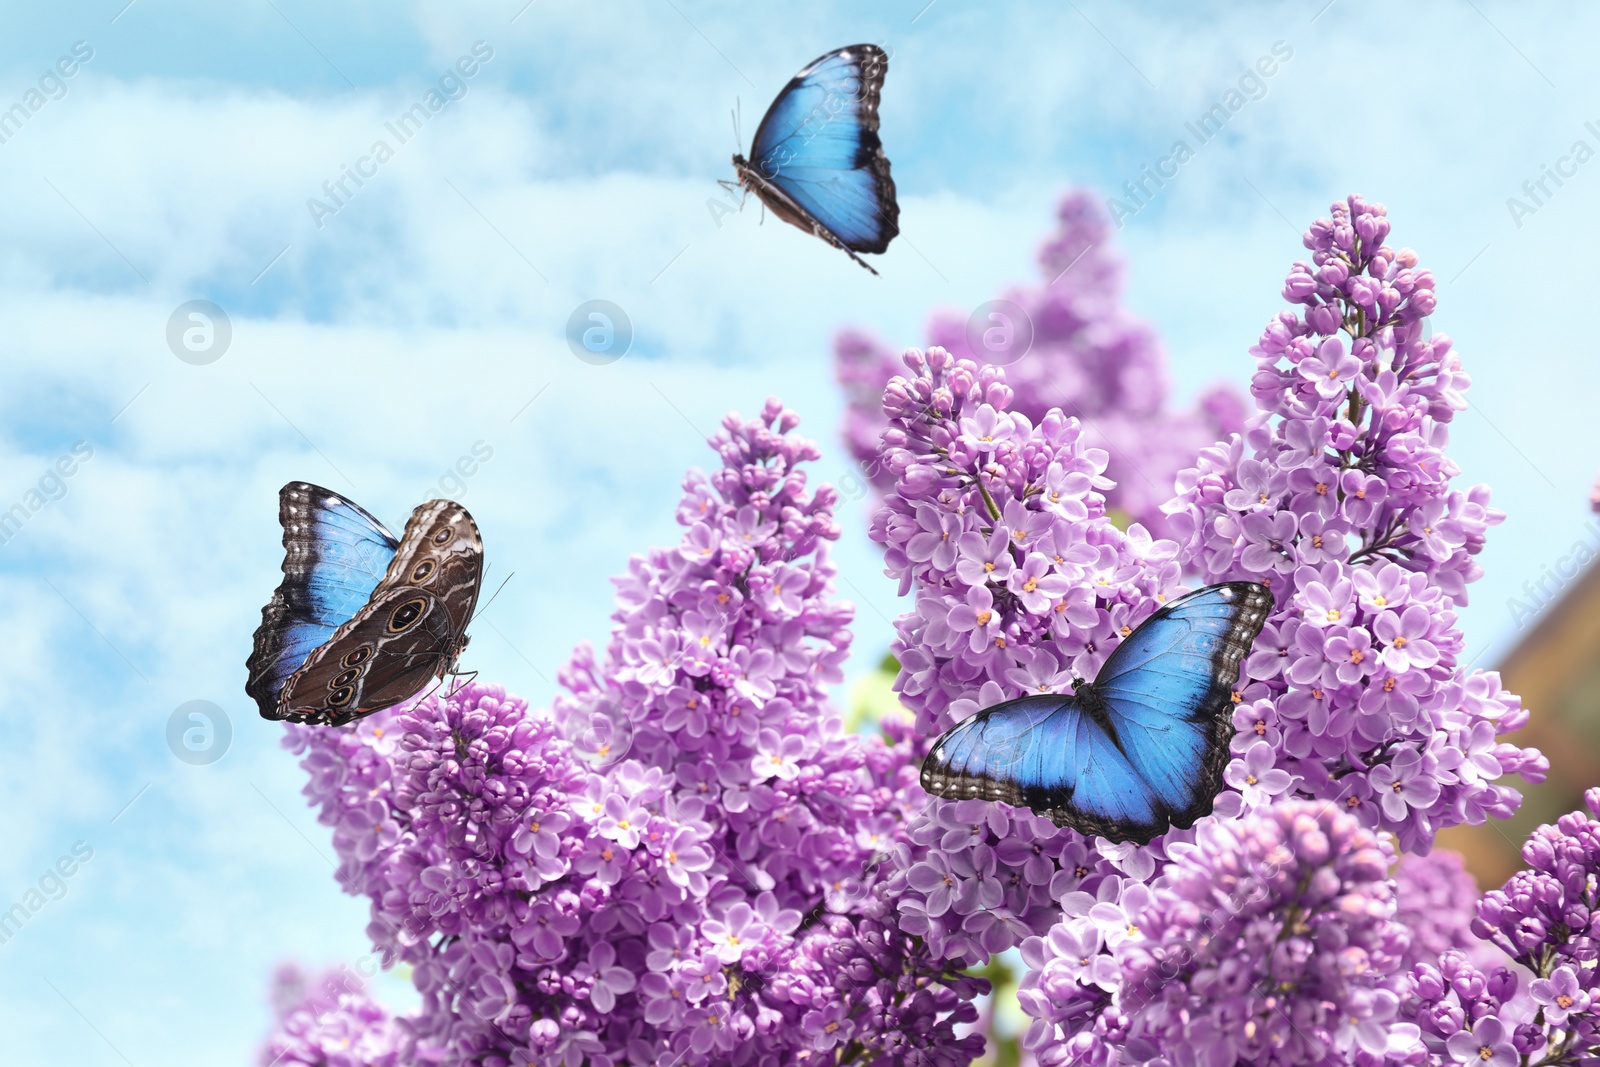 Image of Blossoming lilac and amazing common morpho butterflies outdoors